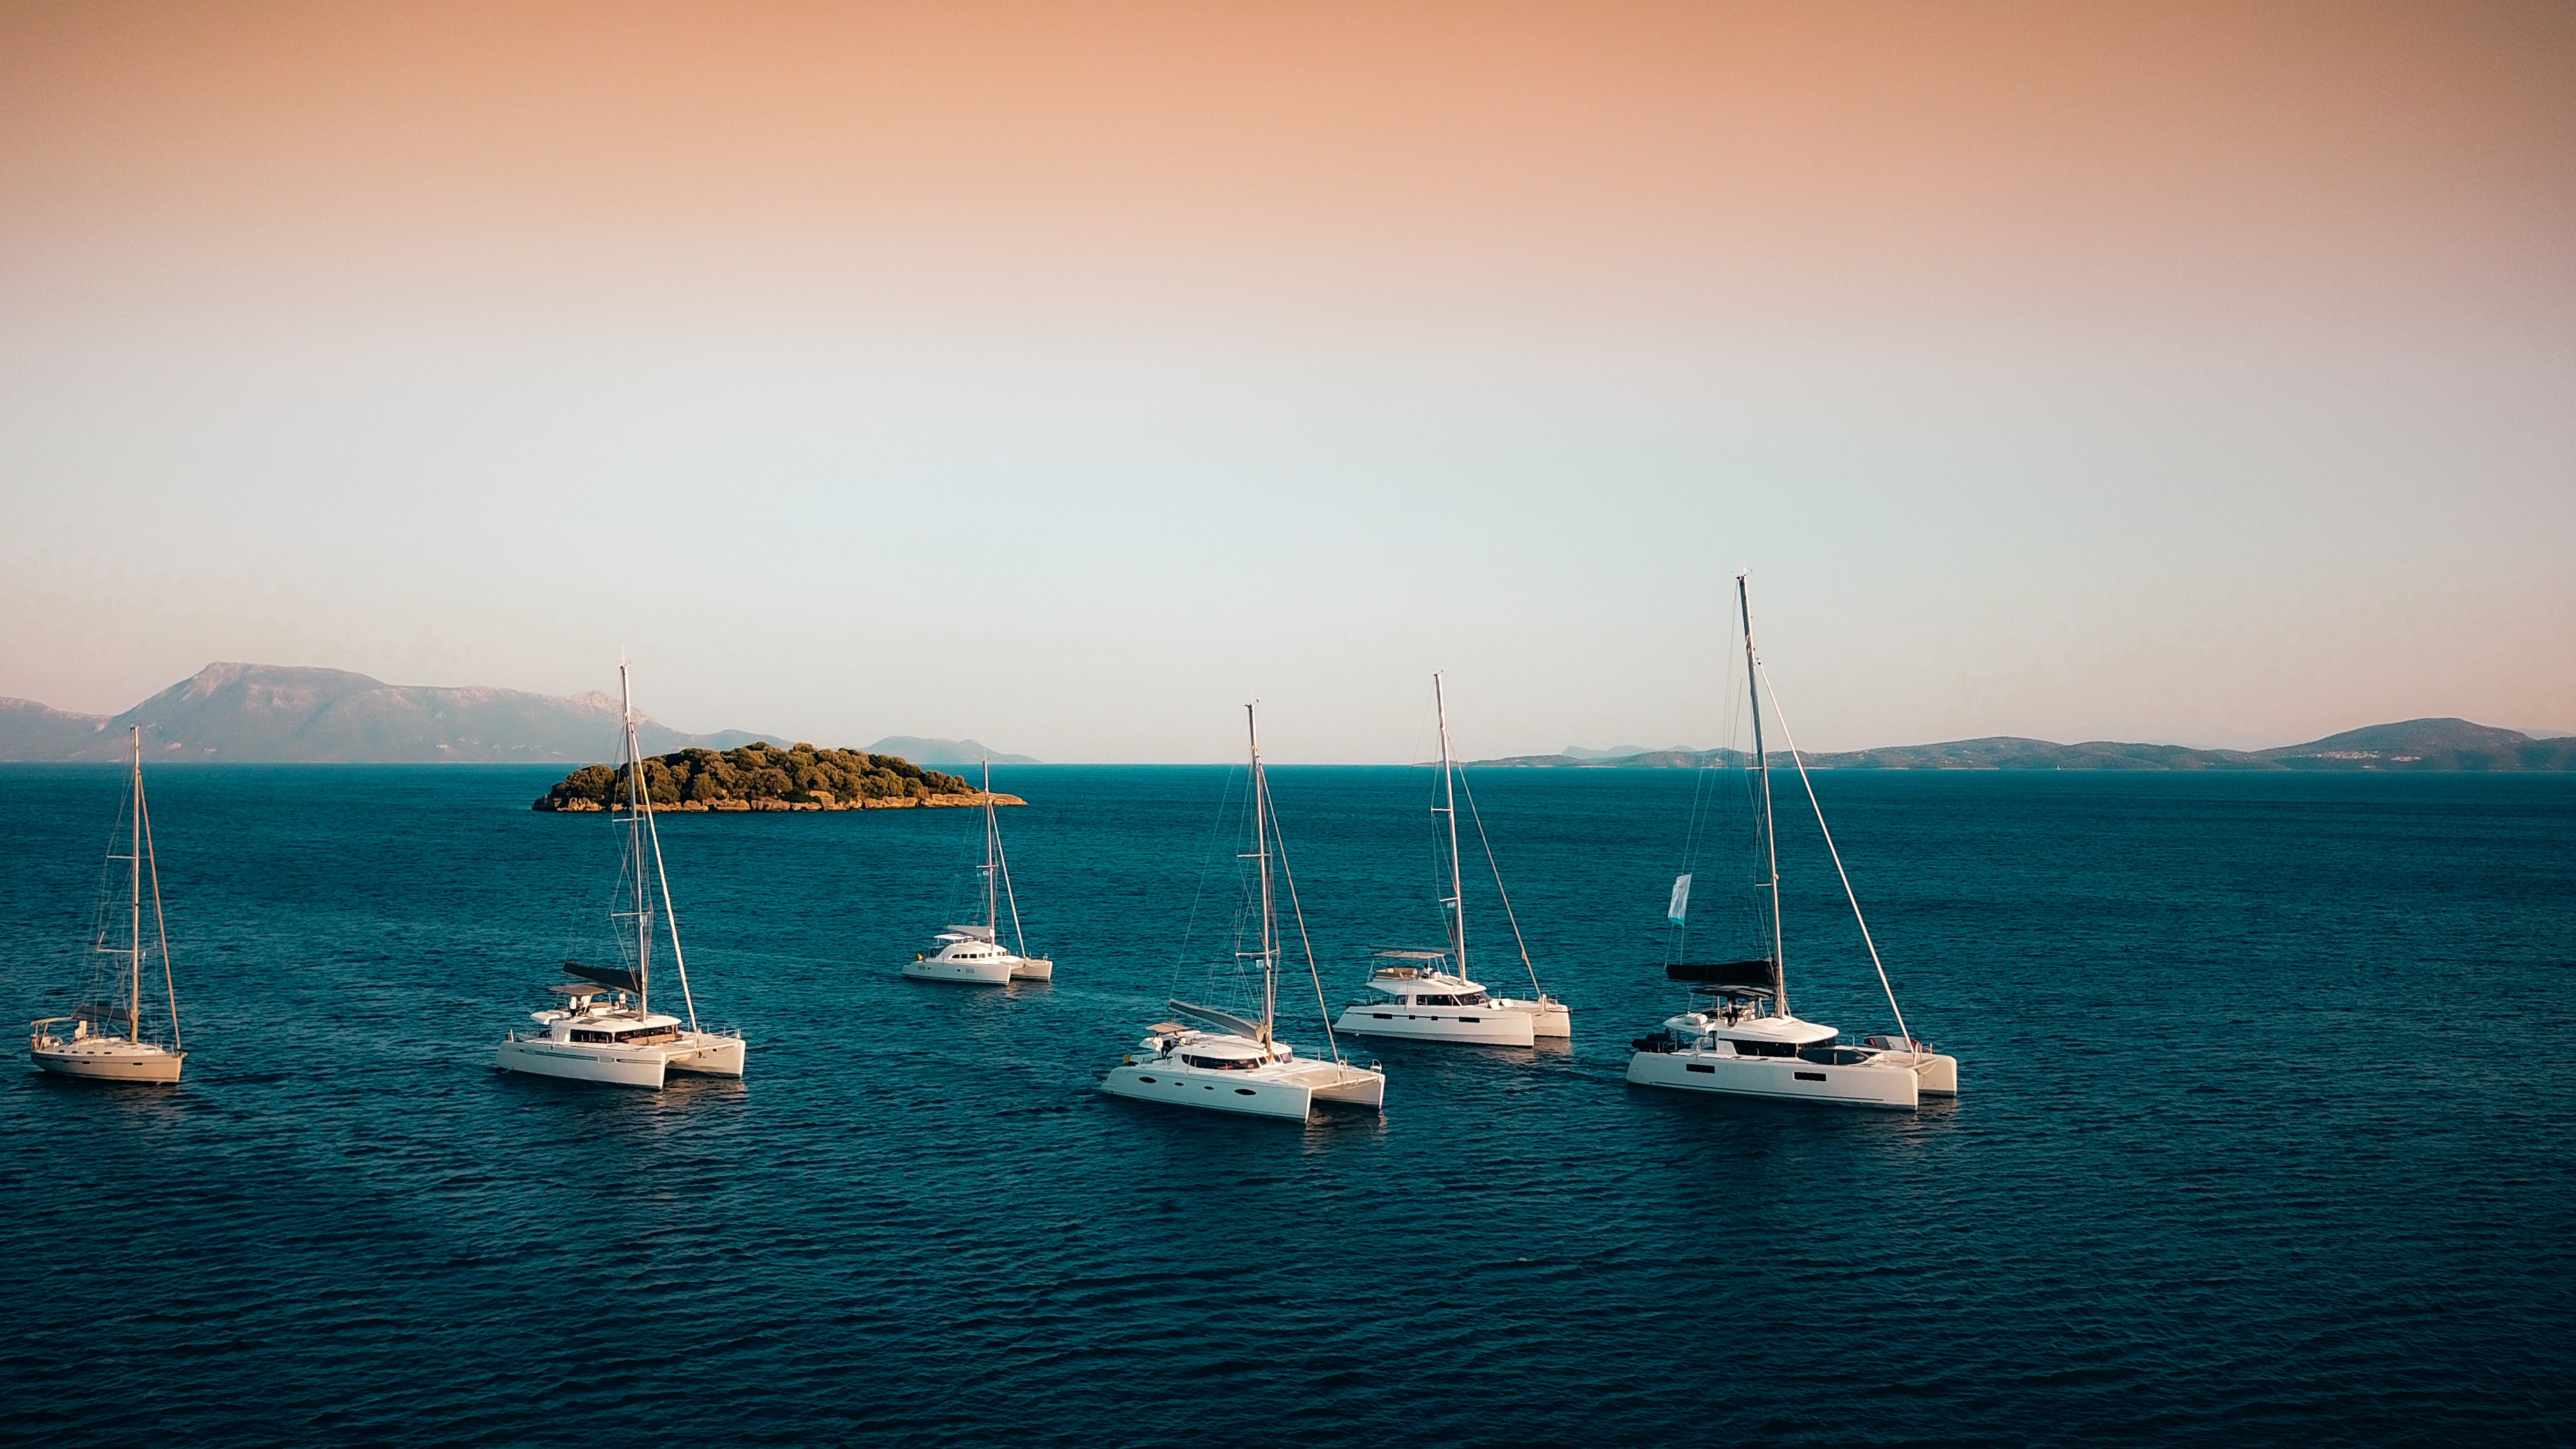 What is a characteristic of a catamaran hull?